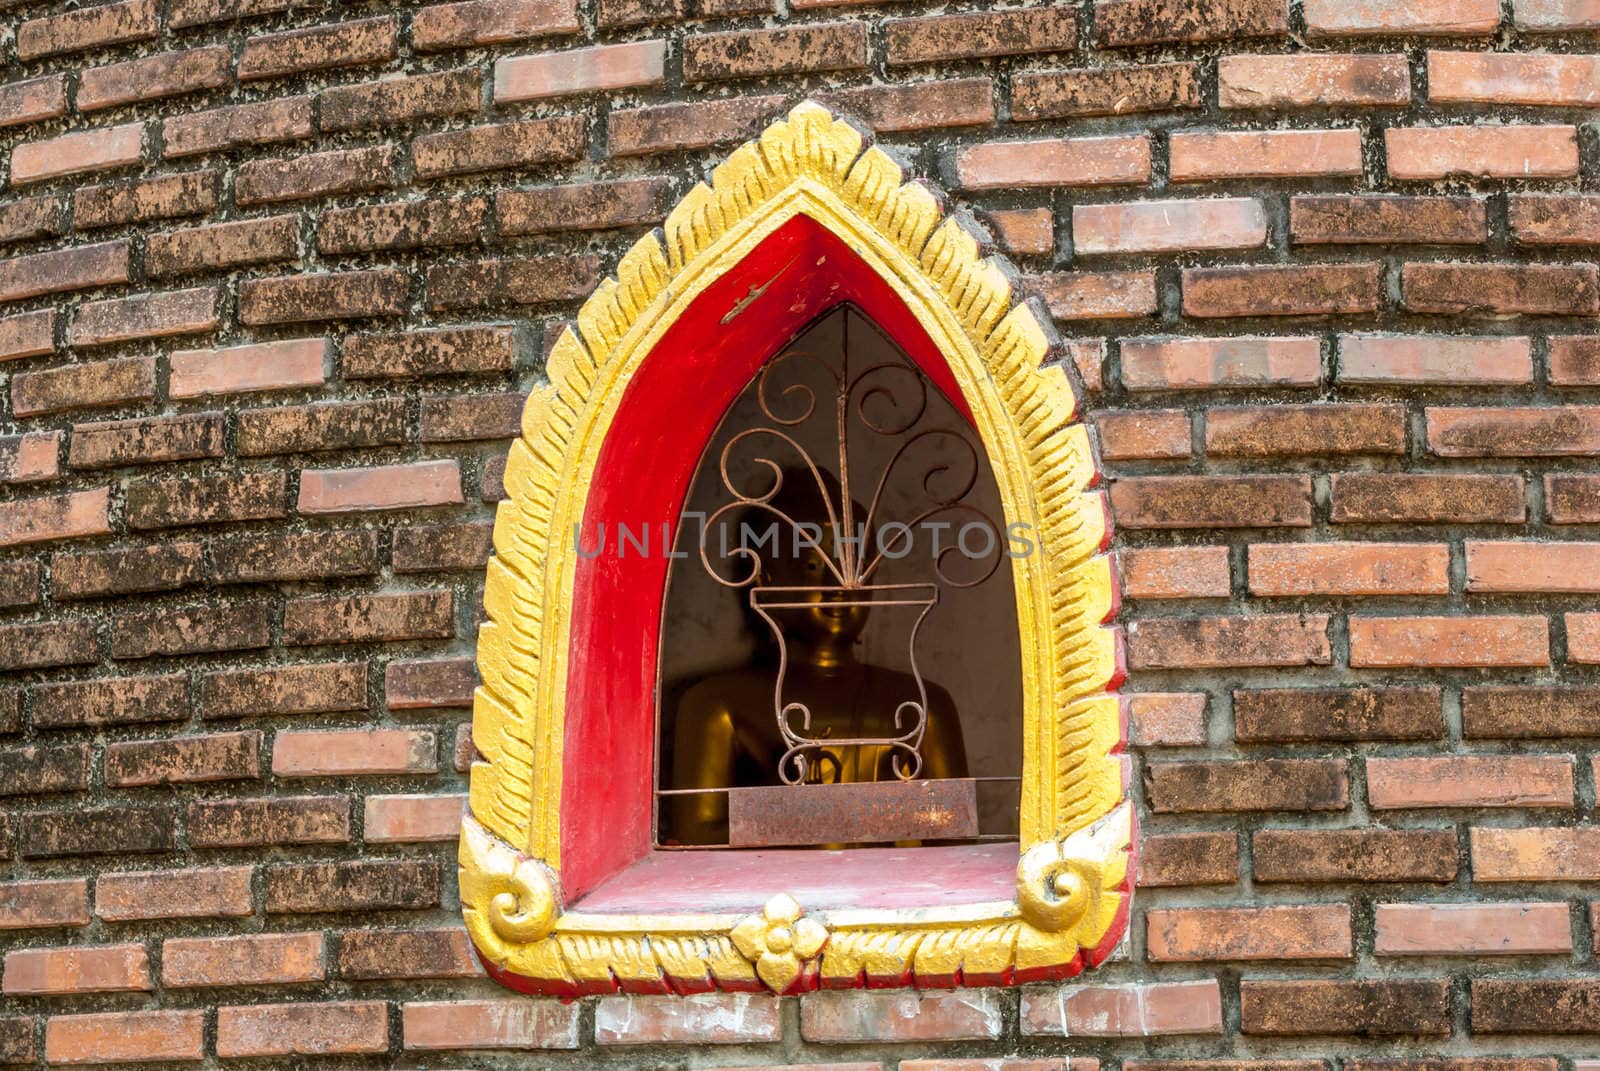 This picture shows the view point of Buddhism. The contemporary Buddhist monastery which imitate Lanna cultural Buddhism architecture style is about 60 years old place at Wat Pha Chareon Tham at San Pha tong district in Chiangmai province, Thailand. This picture would like to point how desire to reach and enlighten on the way of Buddhism religious.